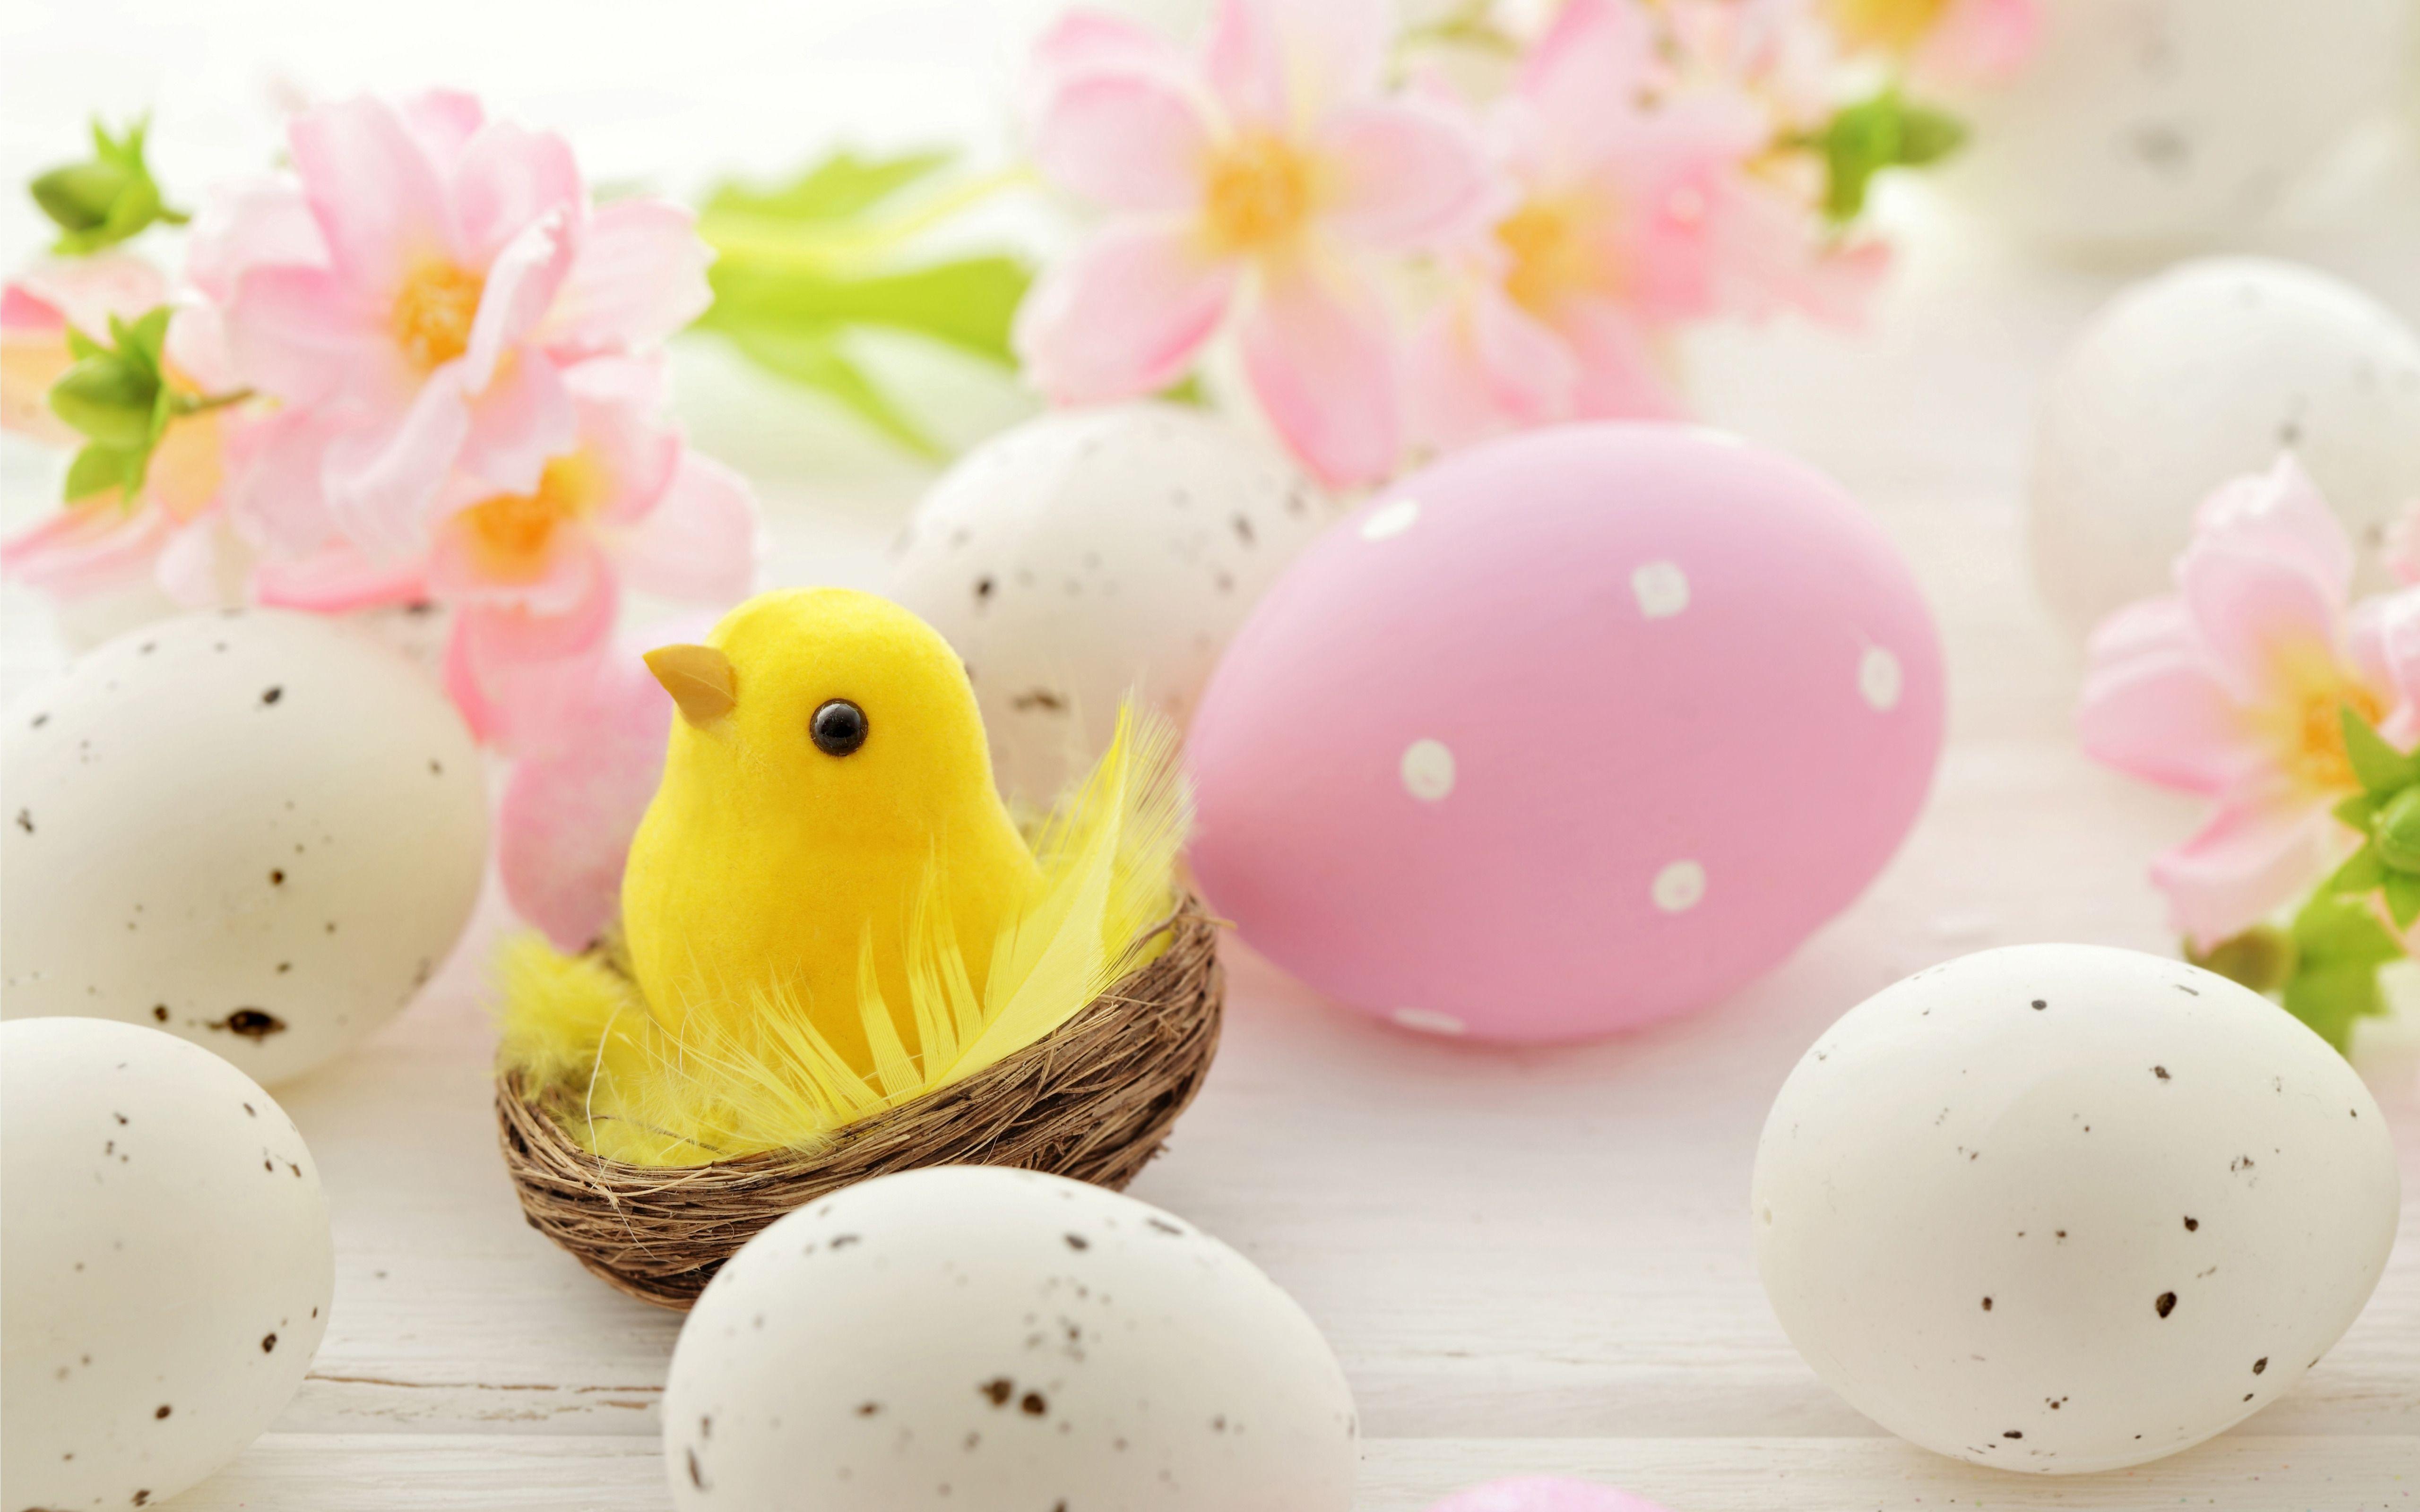 Pink and White Easter eggs, Cute Chick in Nest, Spring Flowers